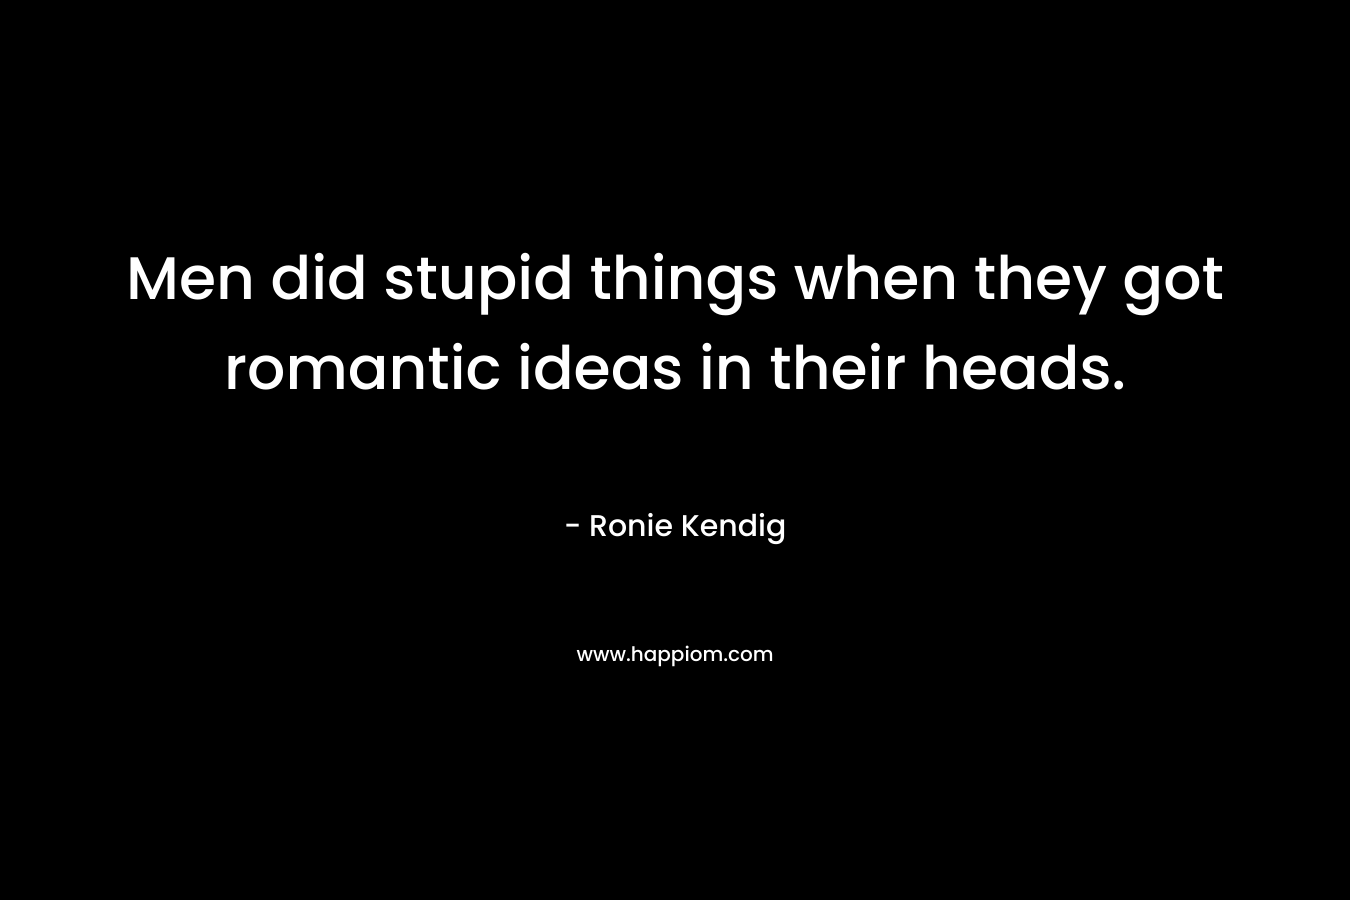 Men did stupid things when they got romantic ideas in their heads.